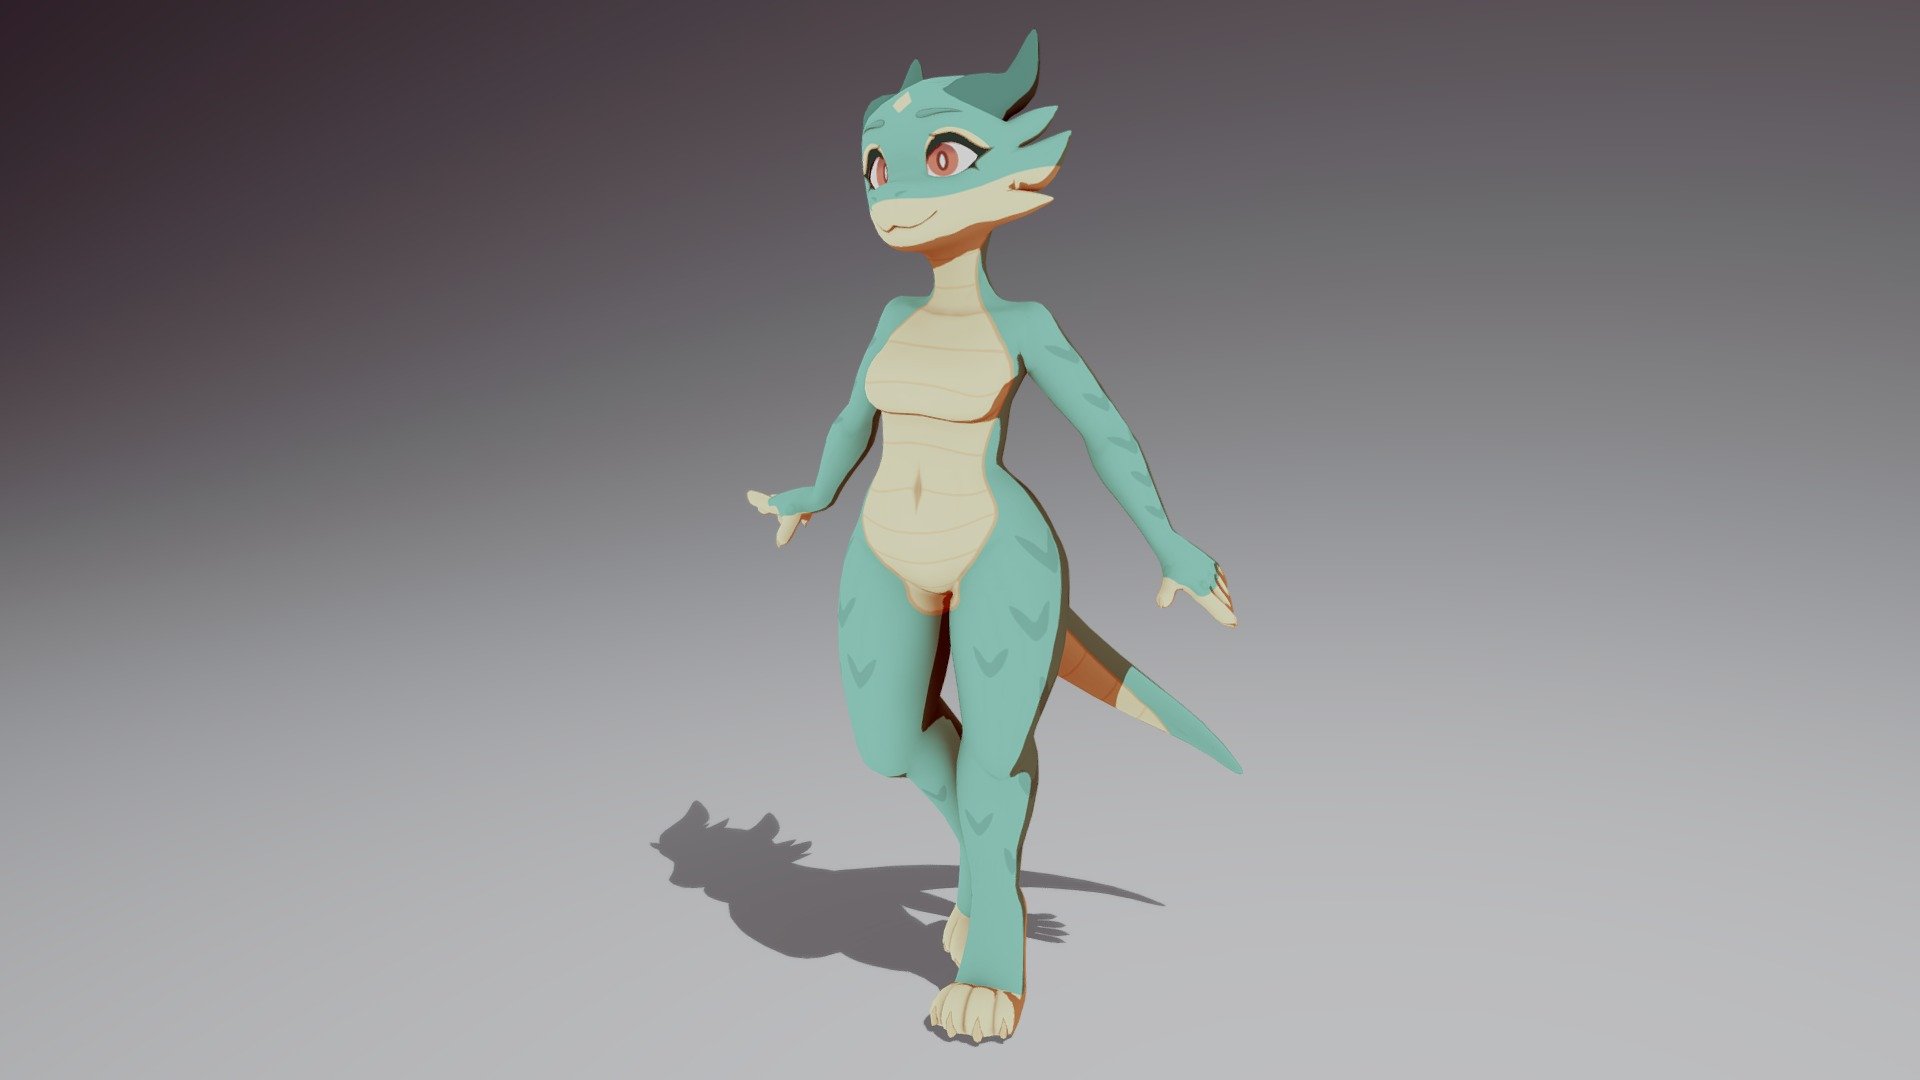 Thanks to the great feedback I got on my Kobold Herbalist model, I am now releasing a basic version of the model for free. 
Download available here, Kobold_Base

Blend Version Includes:




Customizable Colors

VRC Shapekeys

Basic IK Rig

IMPORTANT: DOWNLOADING FROM SKETCHFAB WILL ONLY GIVE YOU THE BAKED LIGHTING AND POSE VERSION. USE THE LINK ABOVE.

Modeled in Blender, textured in ArmorPaint - Furry Kobold Base - Download Free 3D model by RhoBoat 3d model